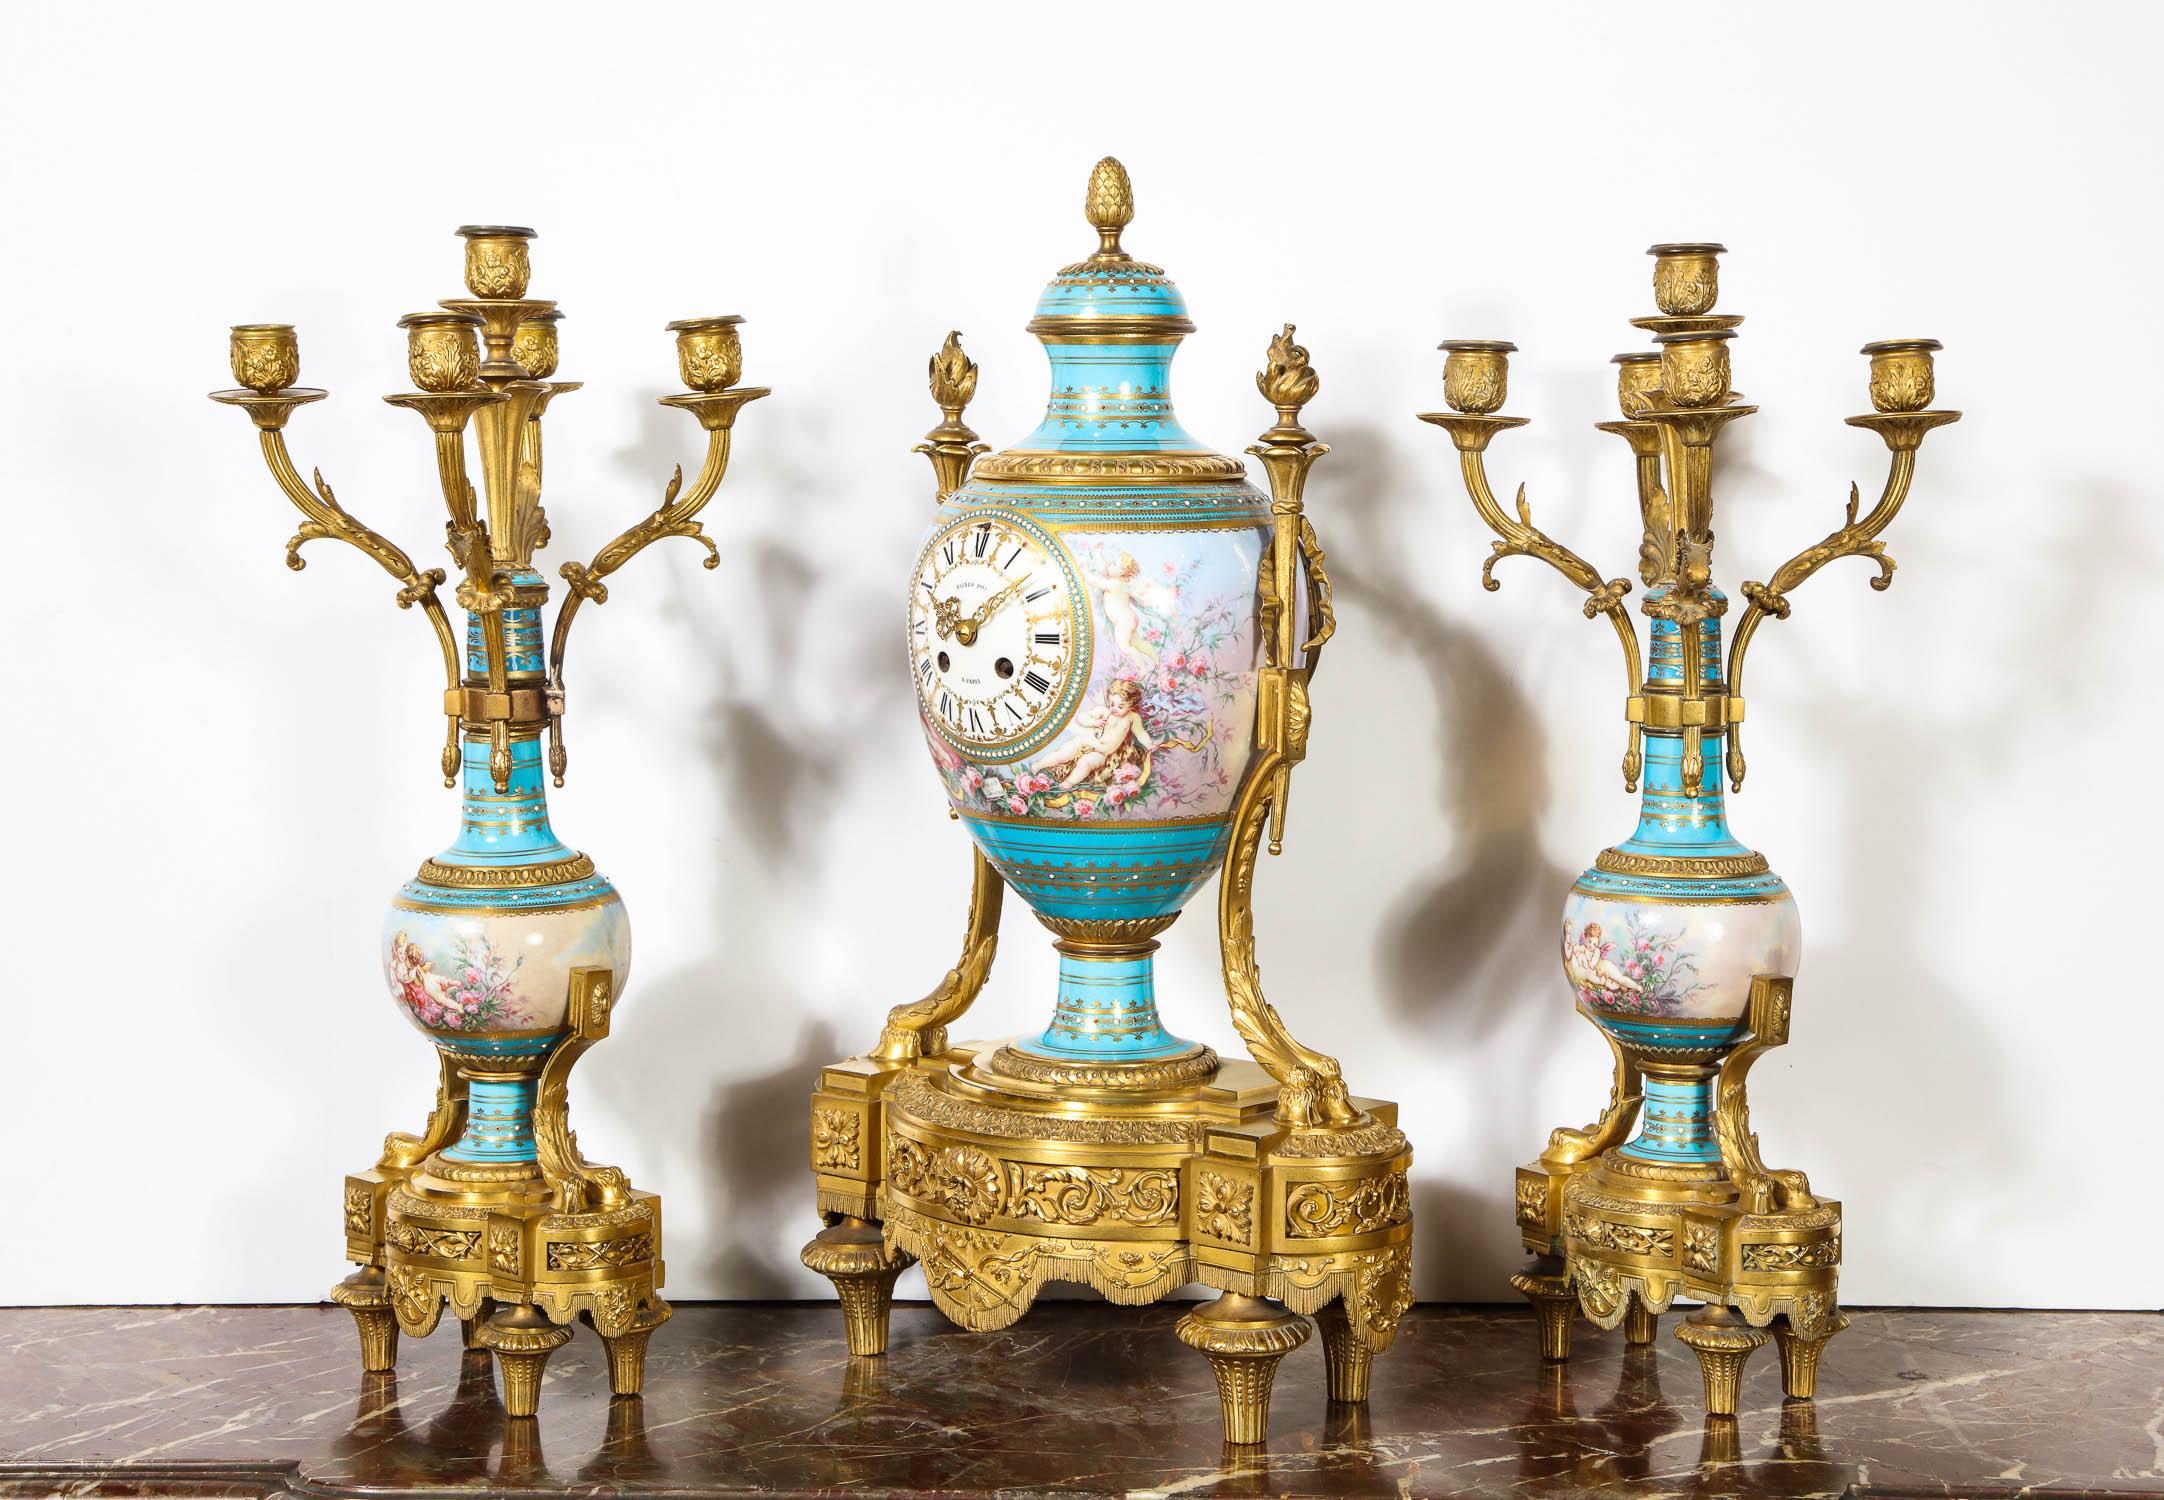 An exceptional French bronze ormolu mounted turquoise jeweled Sèvres Porcelain clock set by Raingo Fres Paris, circa 1880.

Comprising of a clock in vase form and a pair of five-light candelabra. The ormolu is of very high quality and the